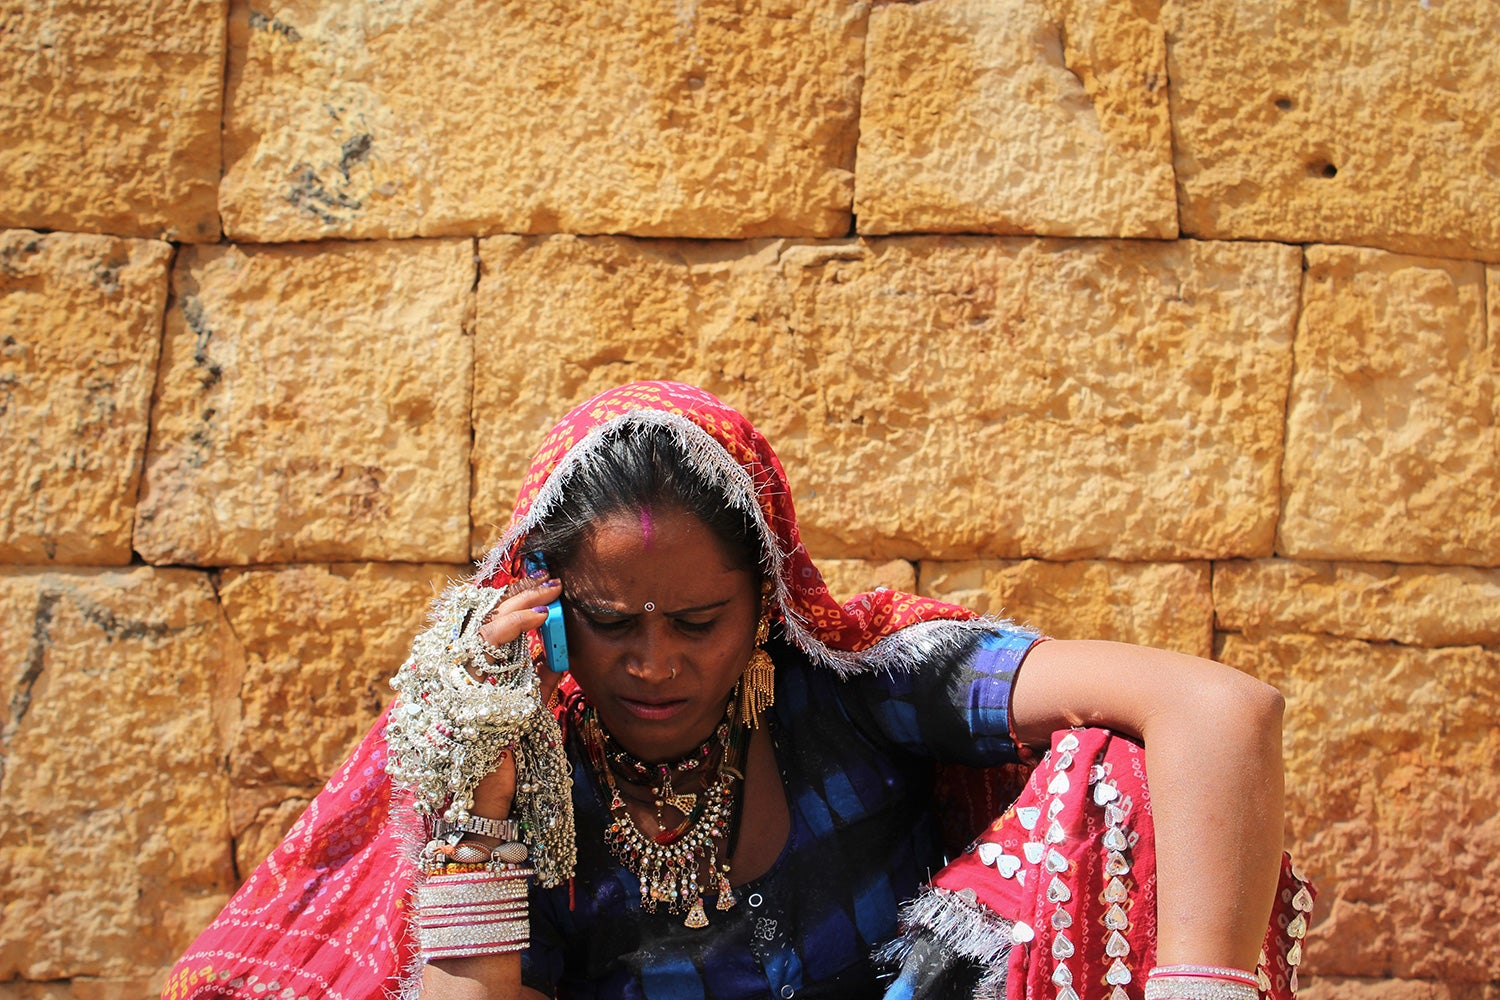 A merchant uses her mobile phone in Jaisalmer, India.